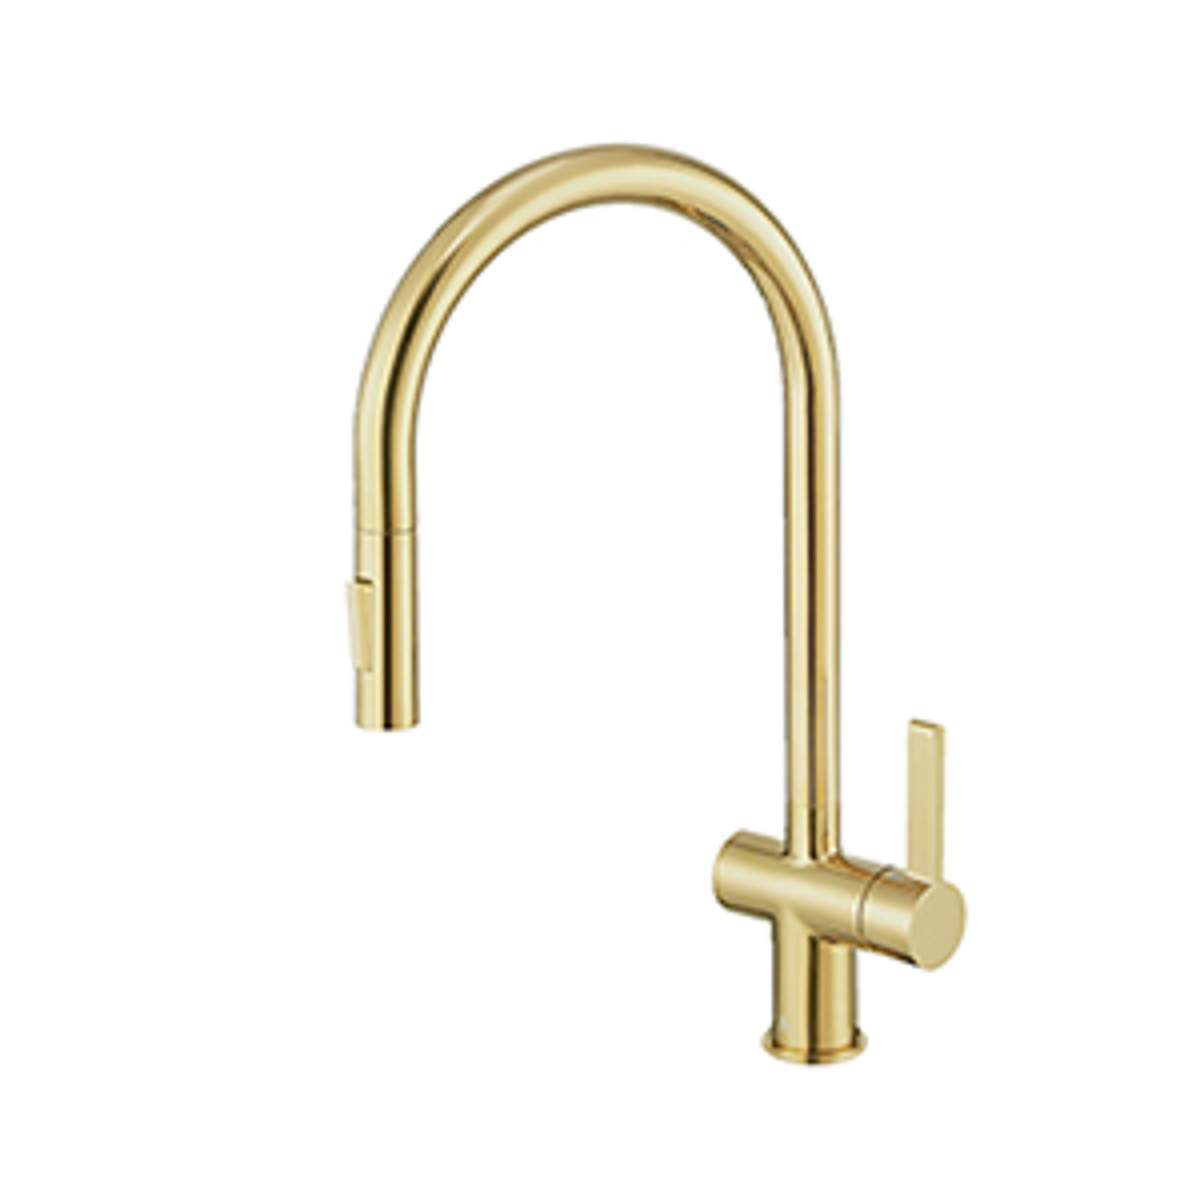 JTP Vos Brushed Brass Single Lever Pull Out Sink Mixer (23127BBR)